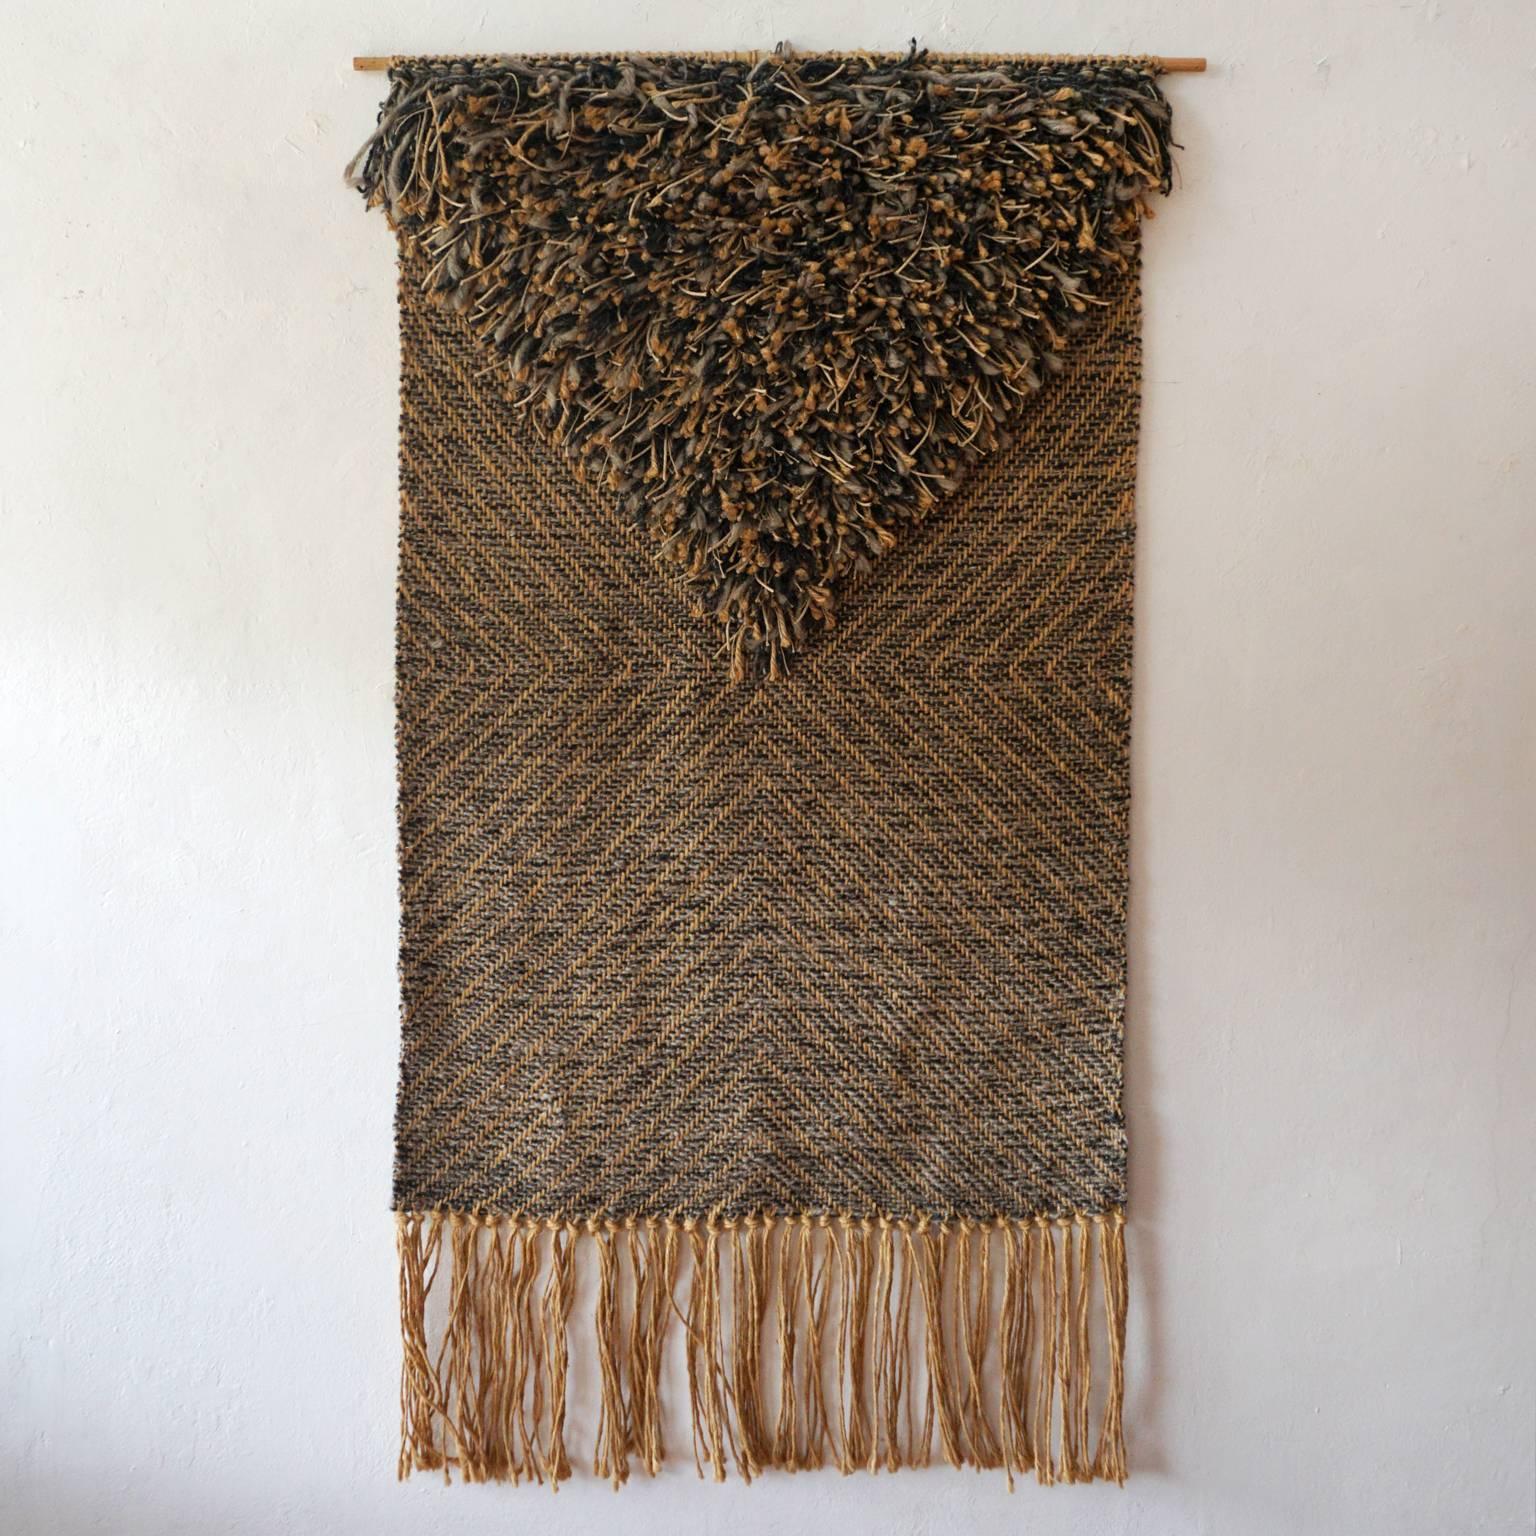 Mid-Century Modern Handwoven Fiber Sculpture Tapestry by Eve Rabinowe, 1970s For Sale